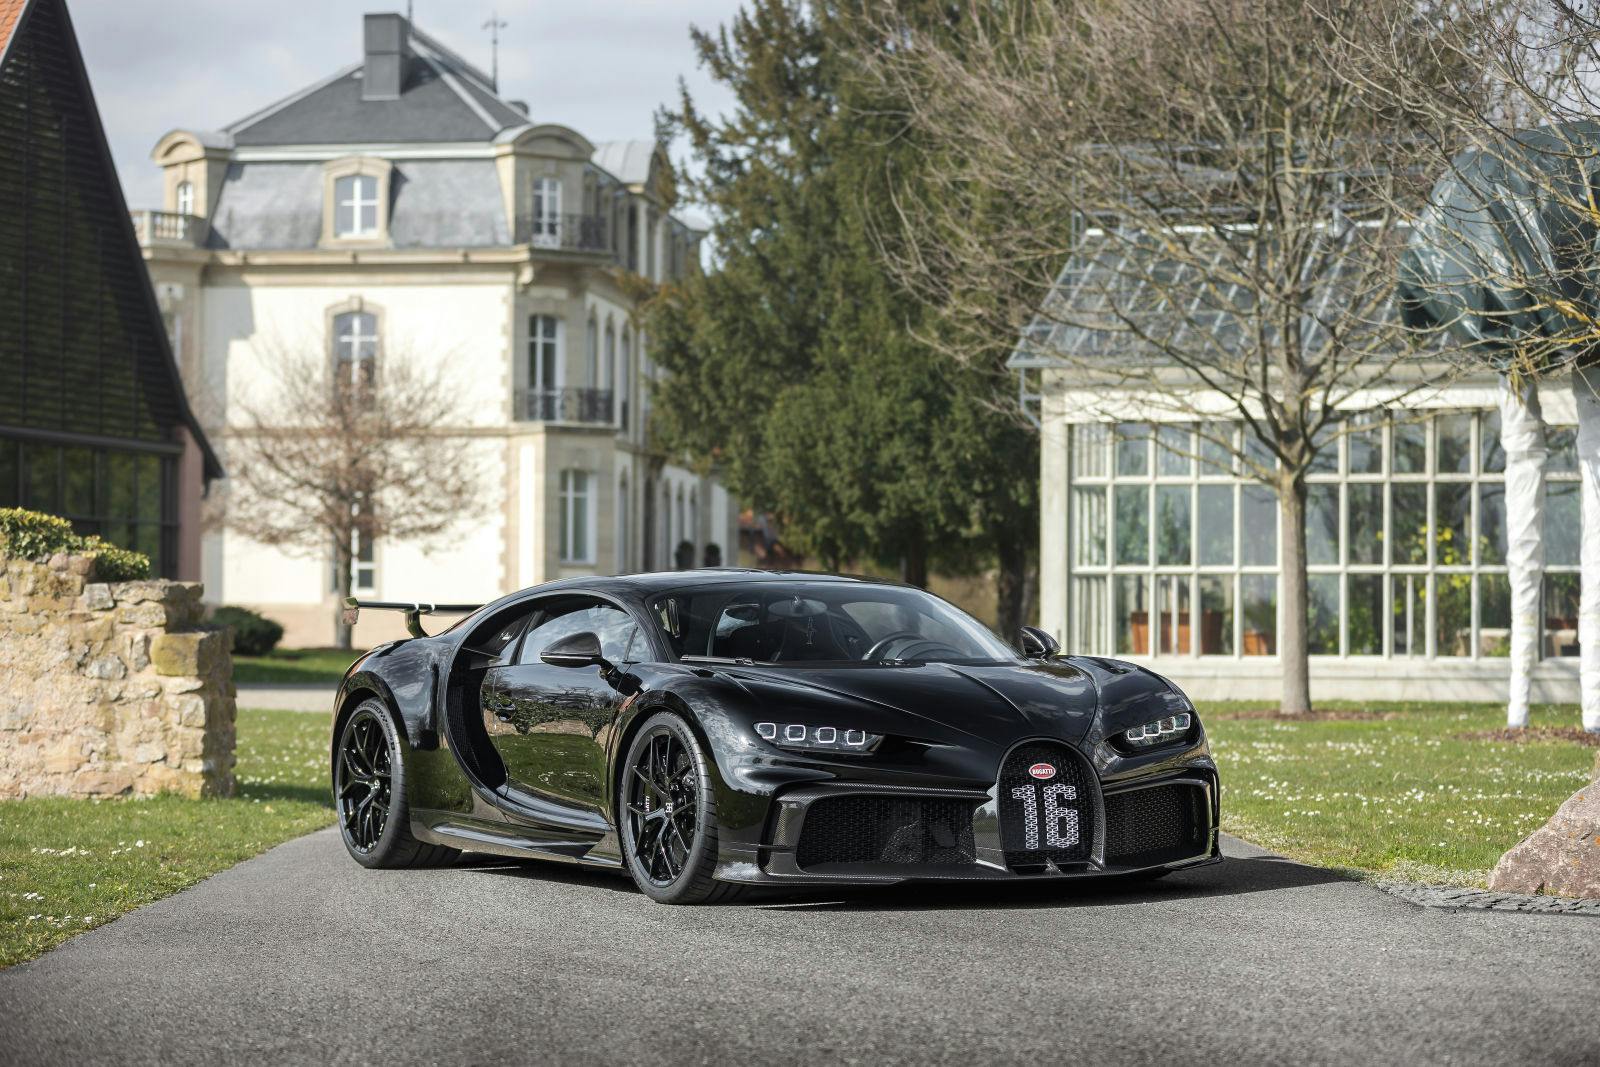 The Bugatti Chiron Pur Sport in ”Nocturne”, with details in “Grey Carbon”, “Gris Rafale” and “Gun Powder“.